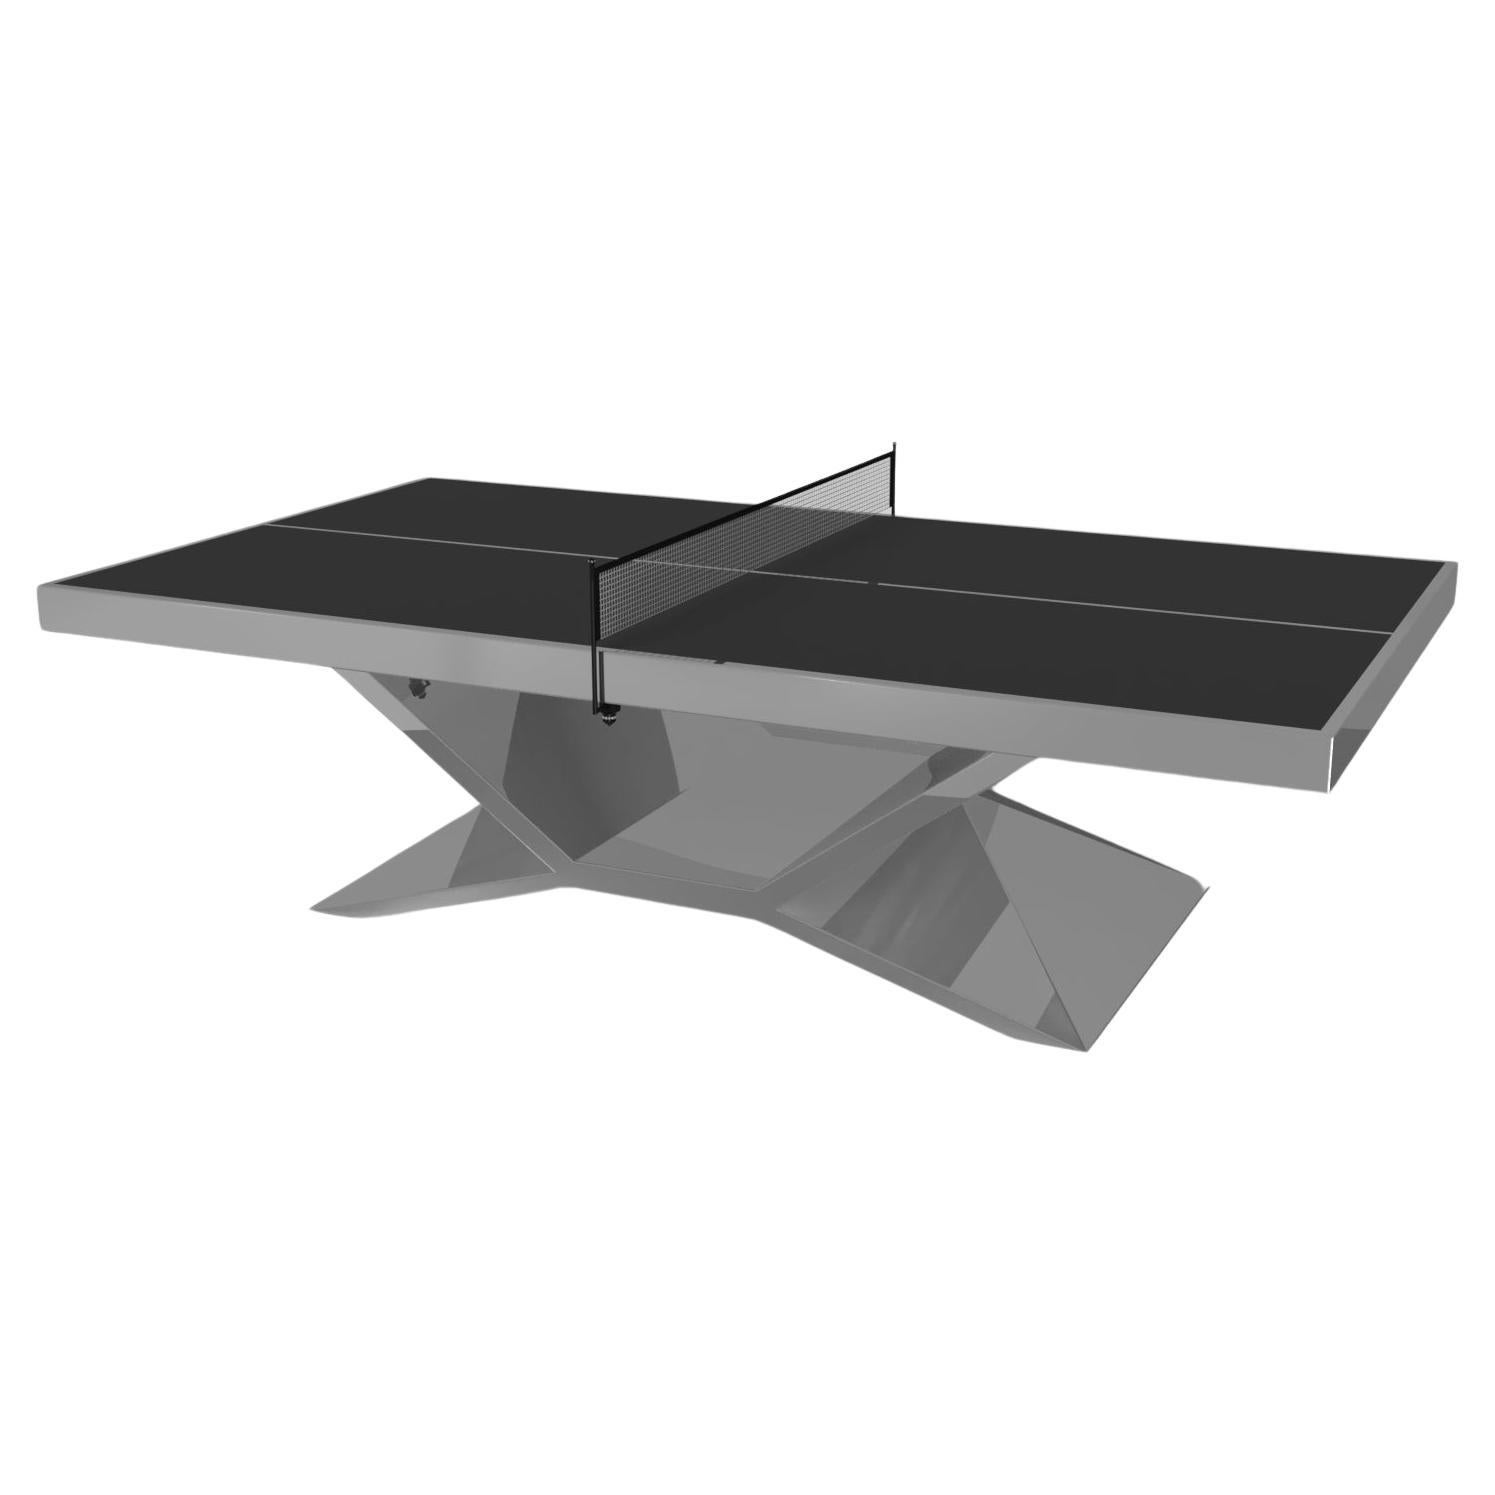 Elevate Customs Kors Tennis Table/Stainless Steel Sheet Metal in 9' -Made in USA For Sale